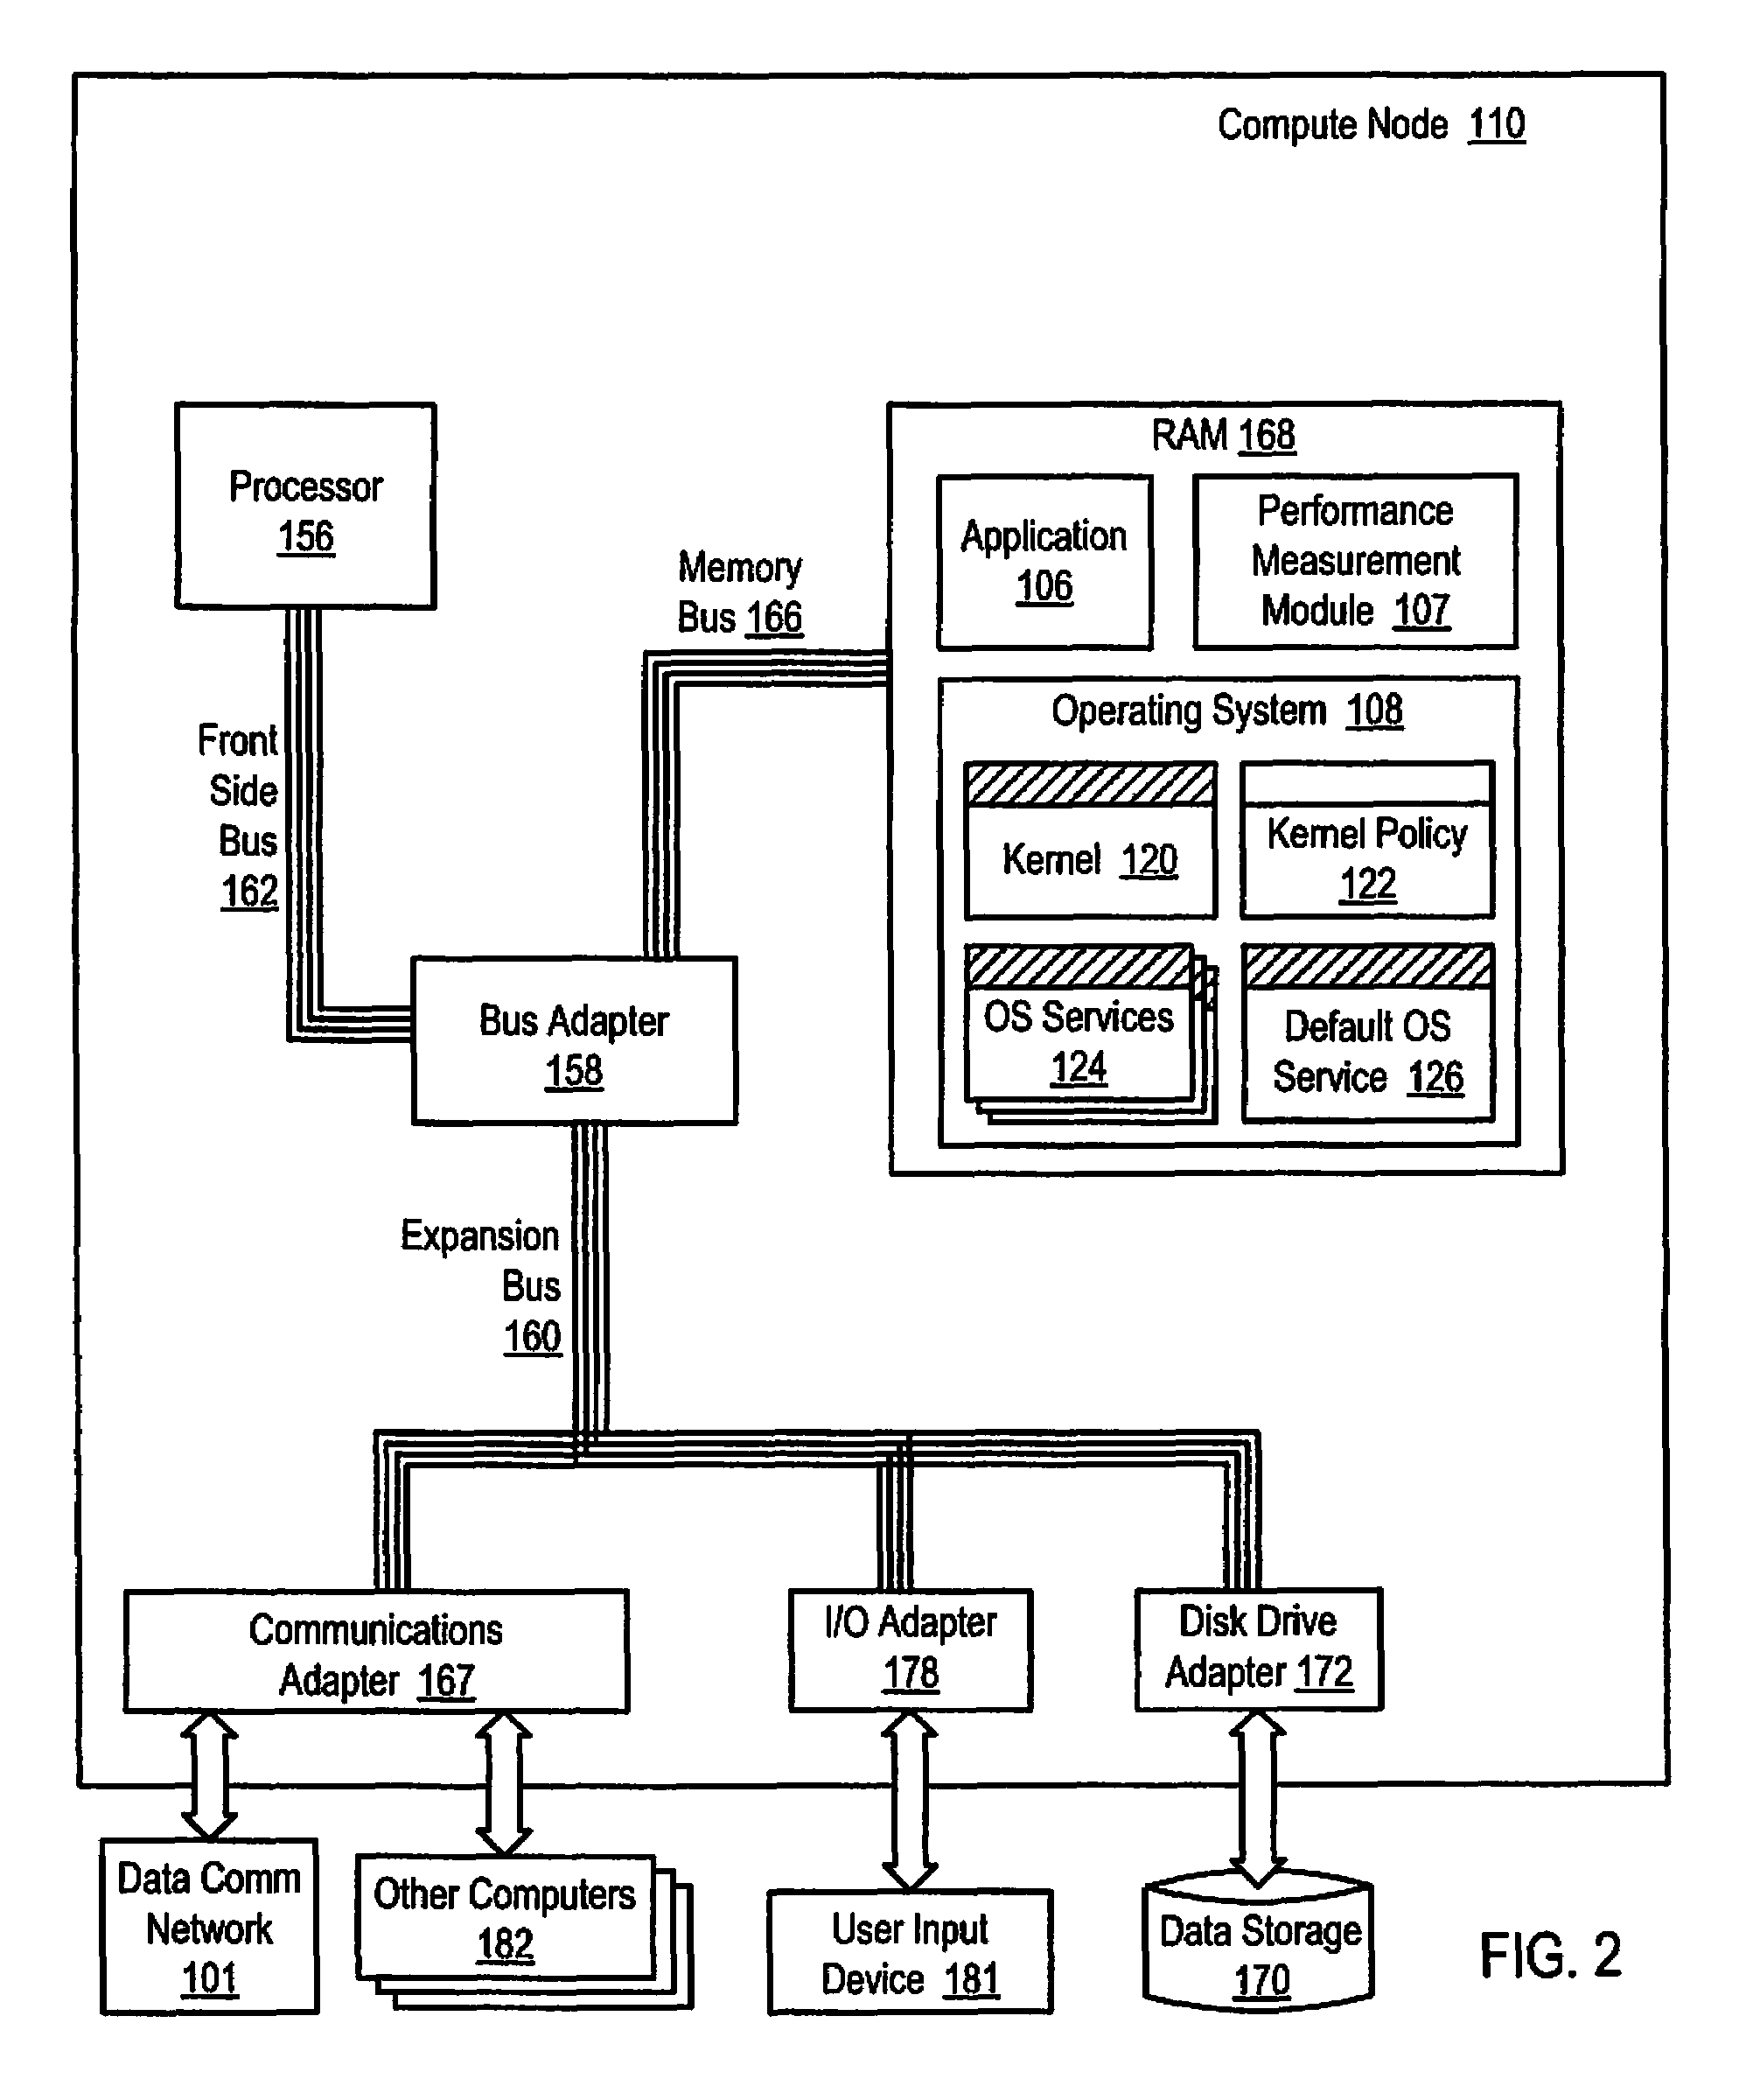 Providing policy-based operating system services in an operating system on a computing system